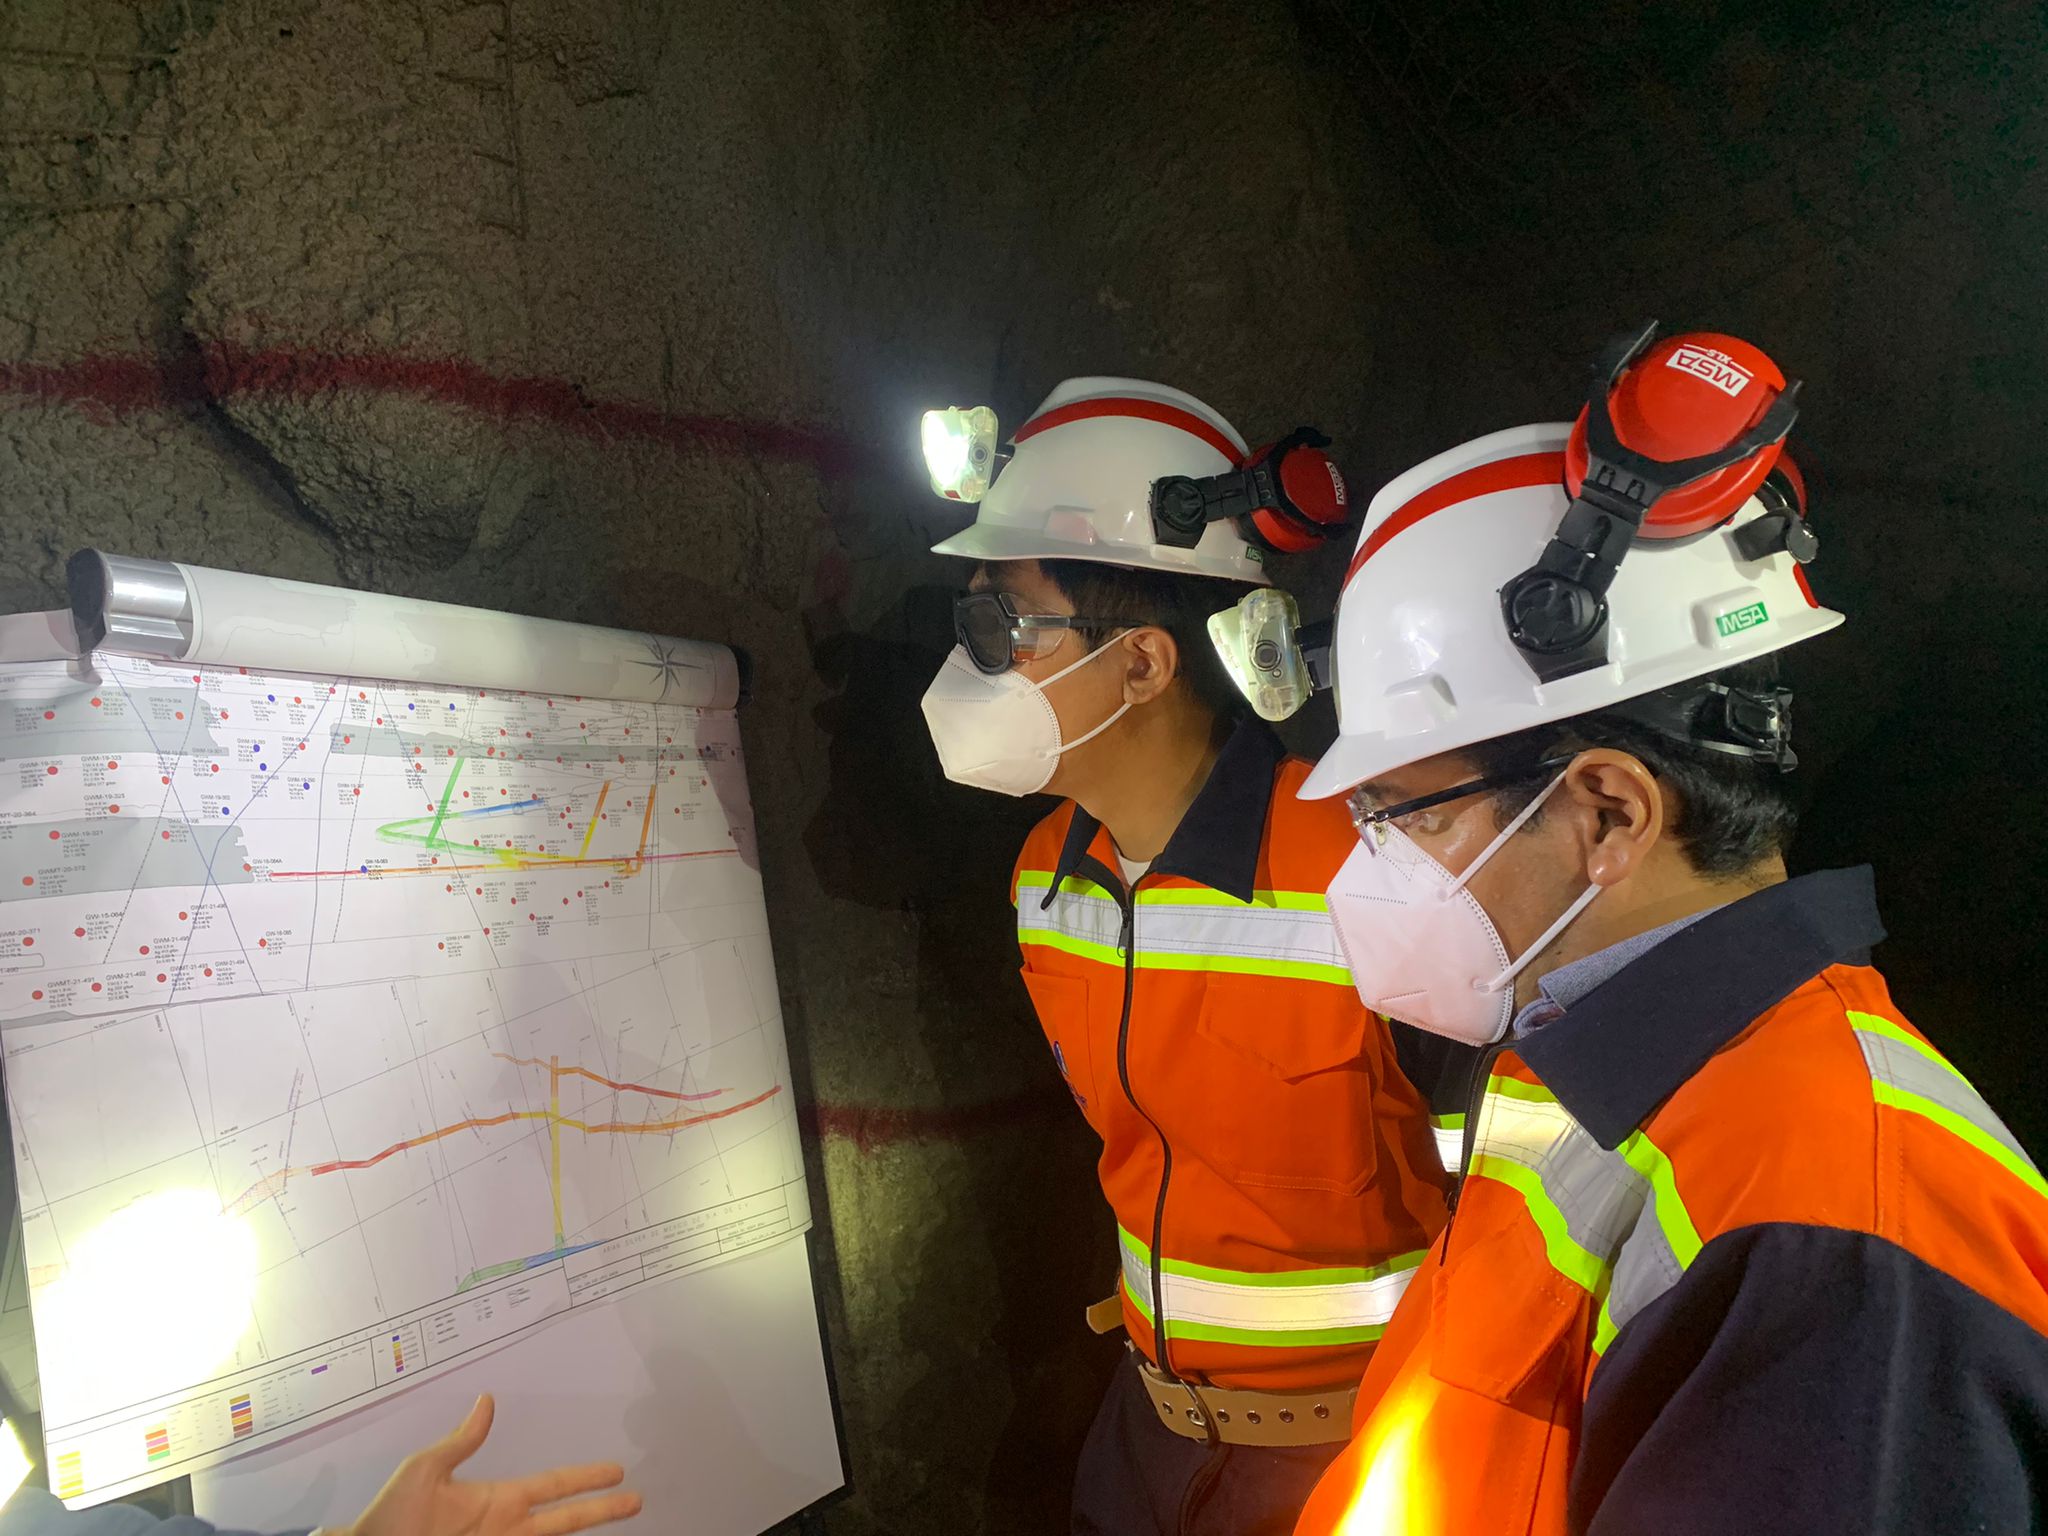 Workmen in a mine inspect a whiteboard while wearing helmets with flashlights and protective gear